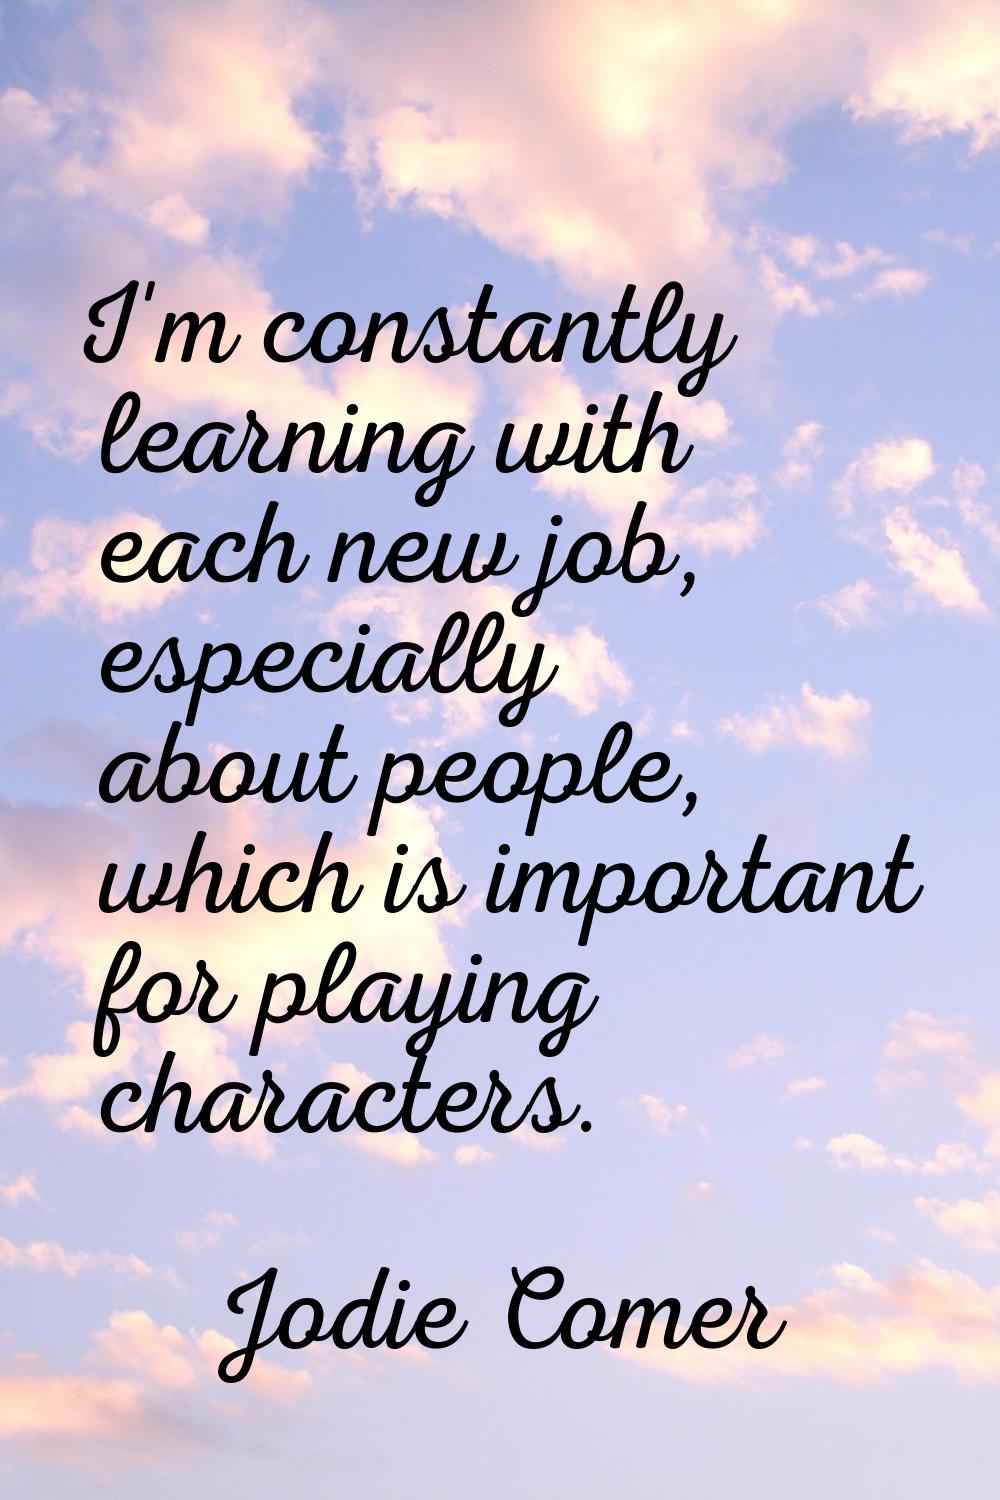 I'm constantly learning with each new job, especially about people, which is important for playing 